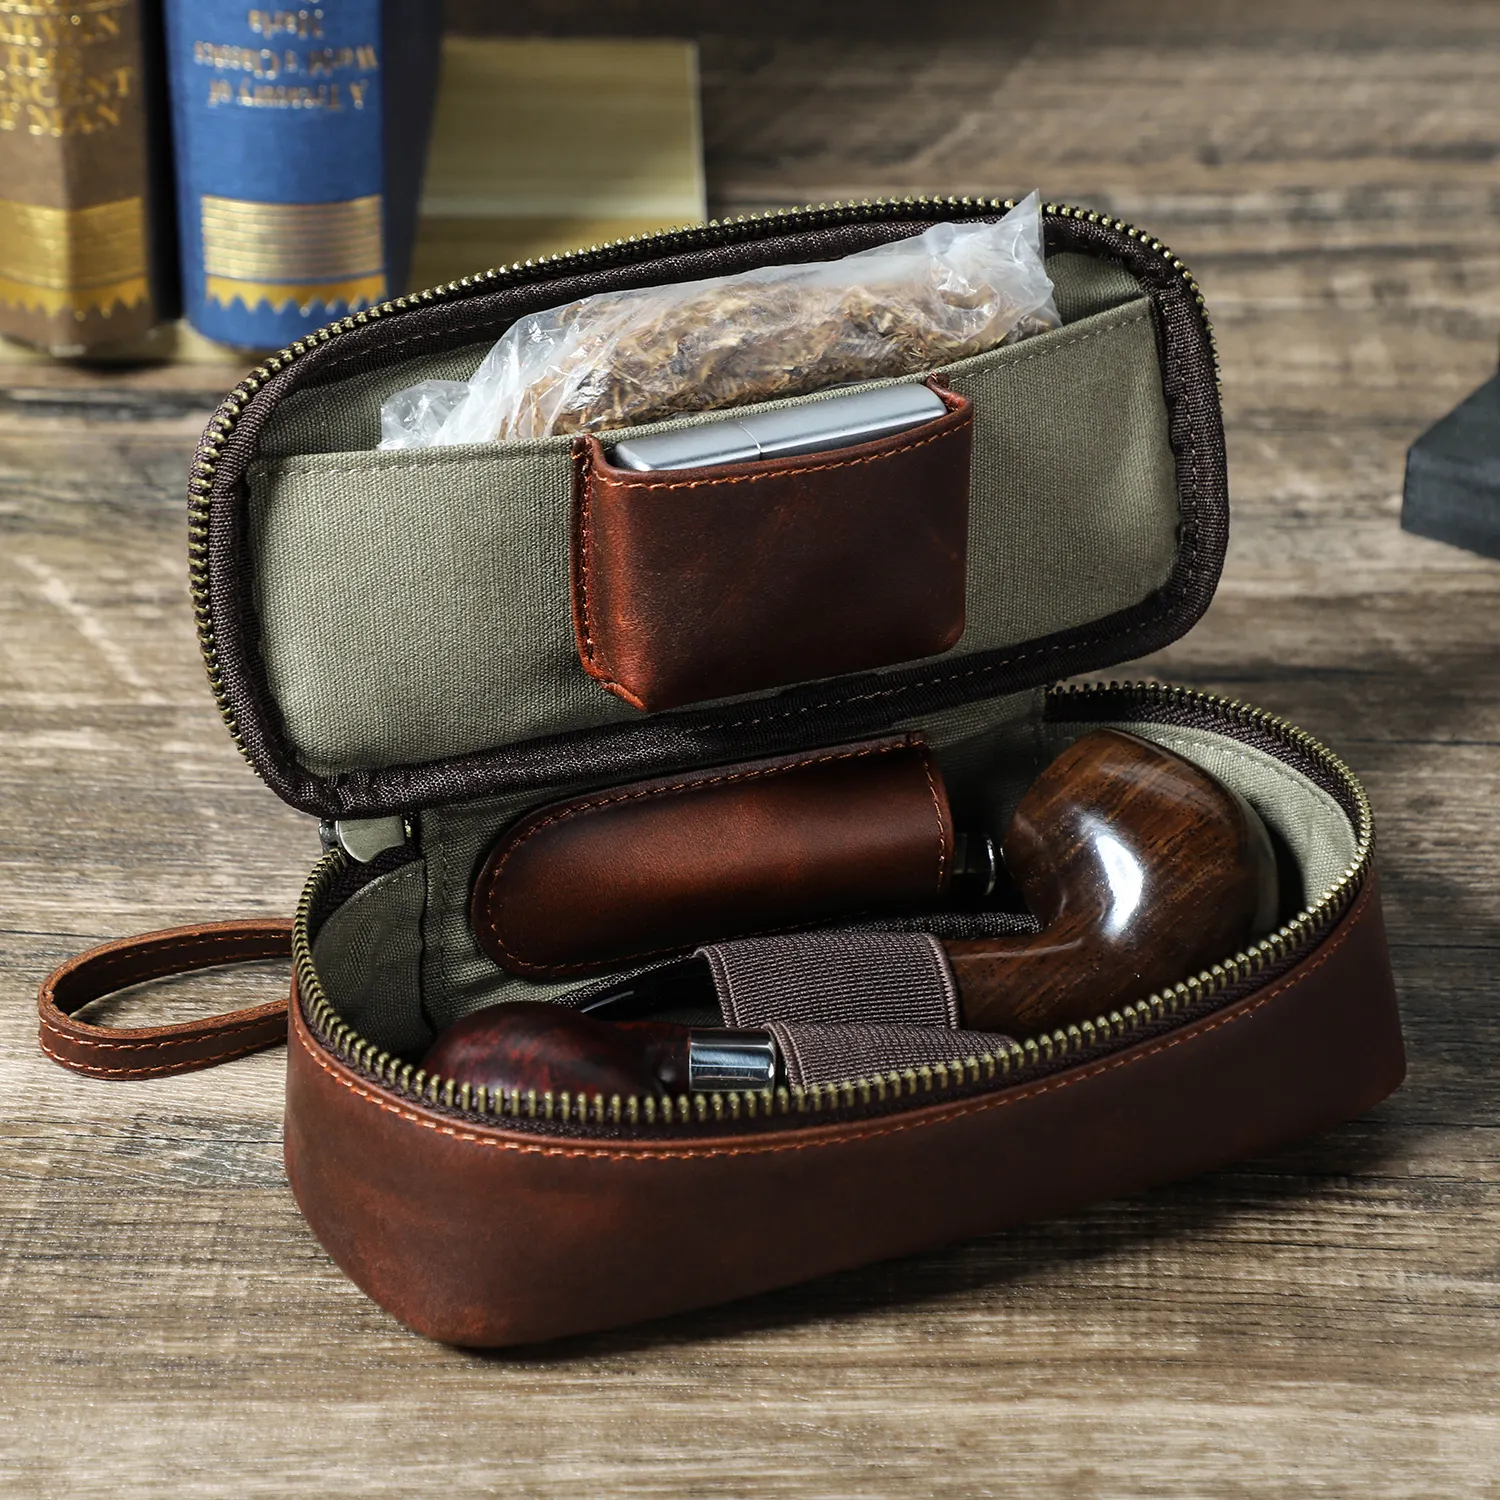 Custom Portable Smoking Pipe Set Bag Travel Genuine Leather Pipe Accessories Tamper Tobacco-pouch Lighter Storage Case Box